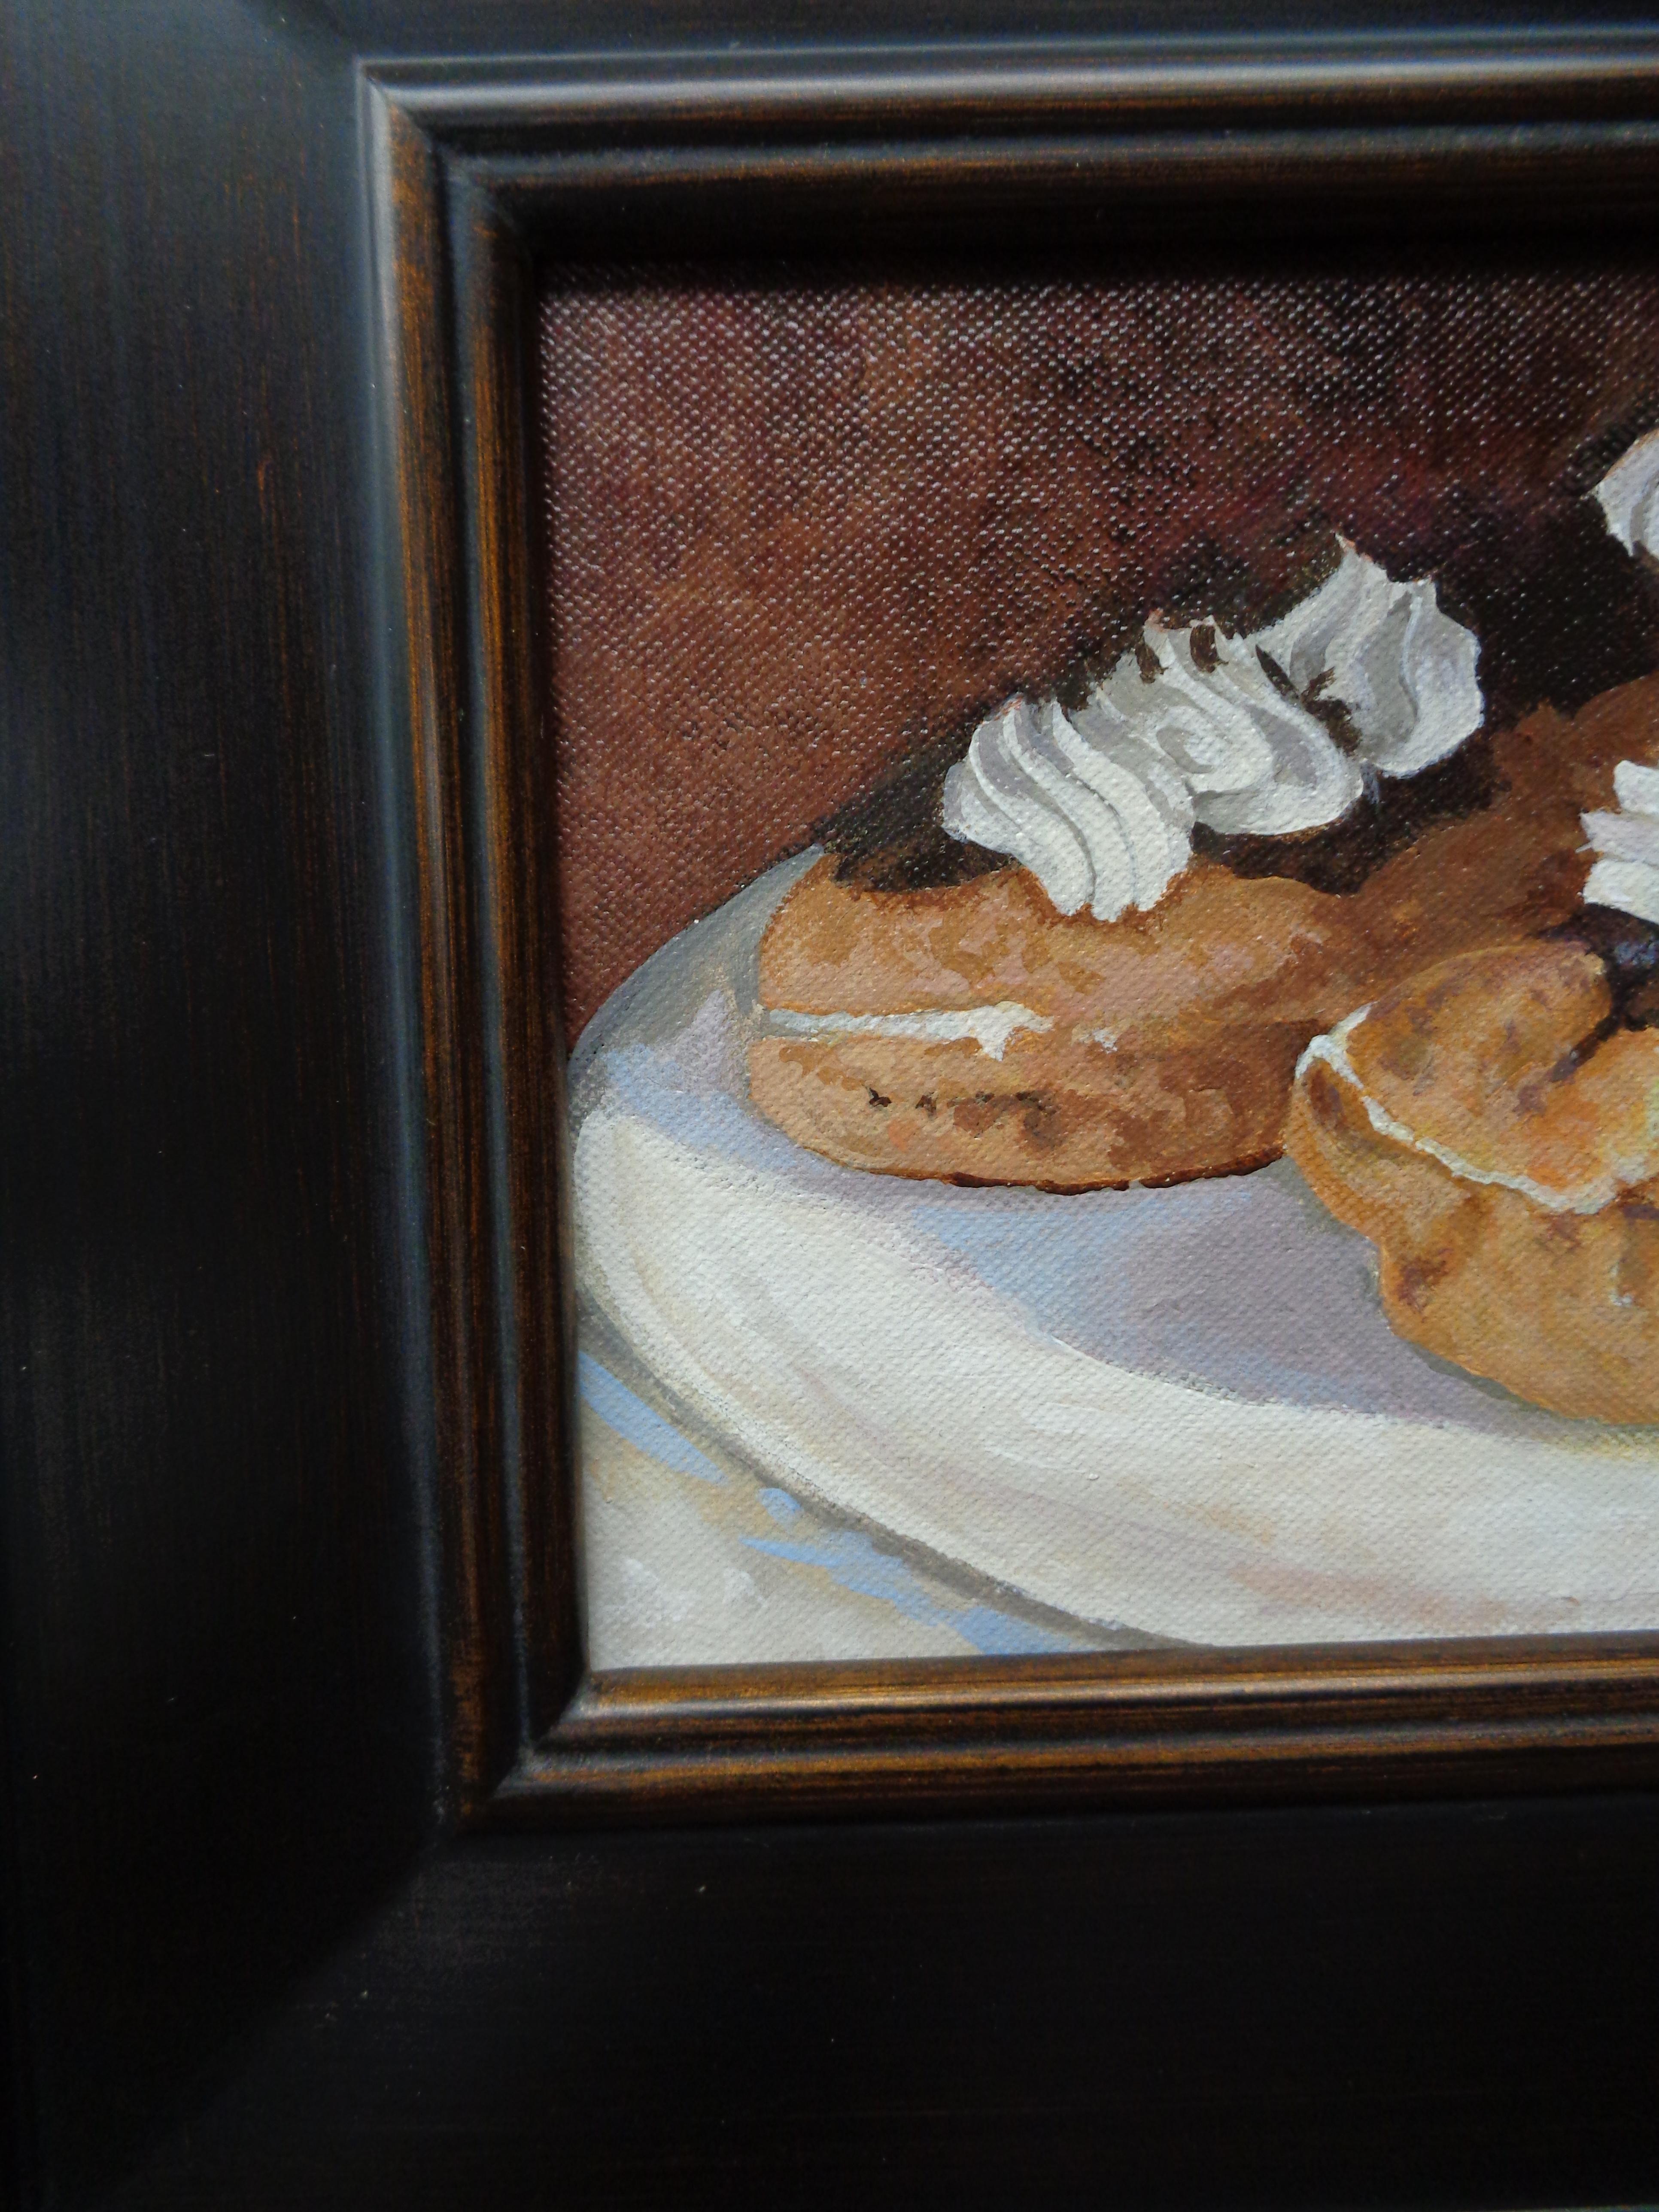 An oil painting on canvas by award winning contemporary artist Michael Budden that showcases a pair of eclairs. Image is 6 x 8 unframed.
ARTIST'S STATEMENT
I have been in the art business as an artist and dealer since the early 80's. Almost 40 years